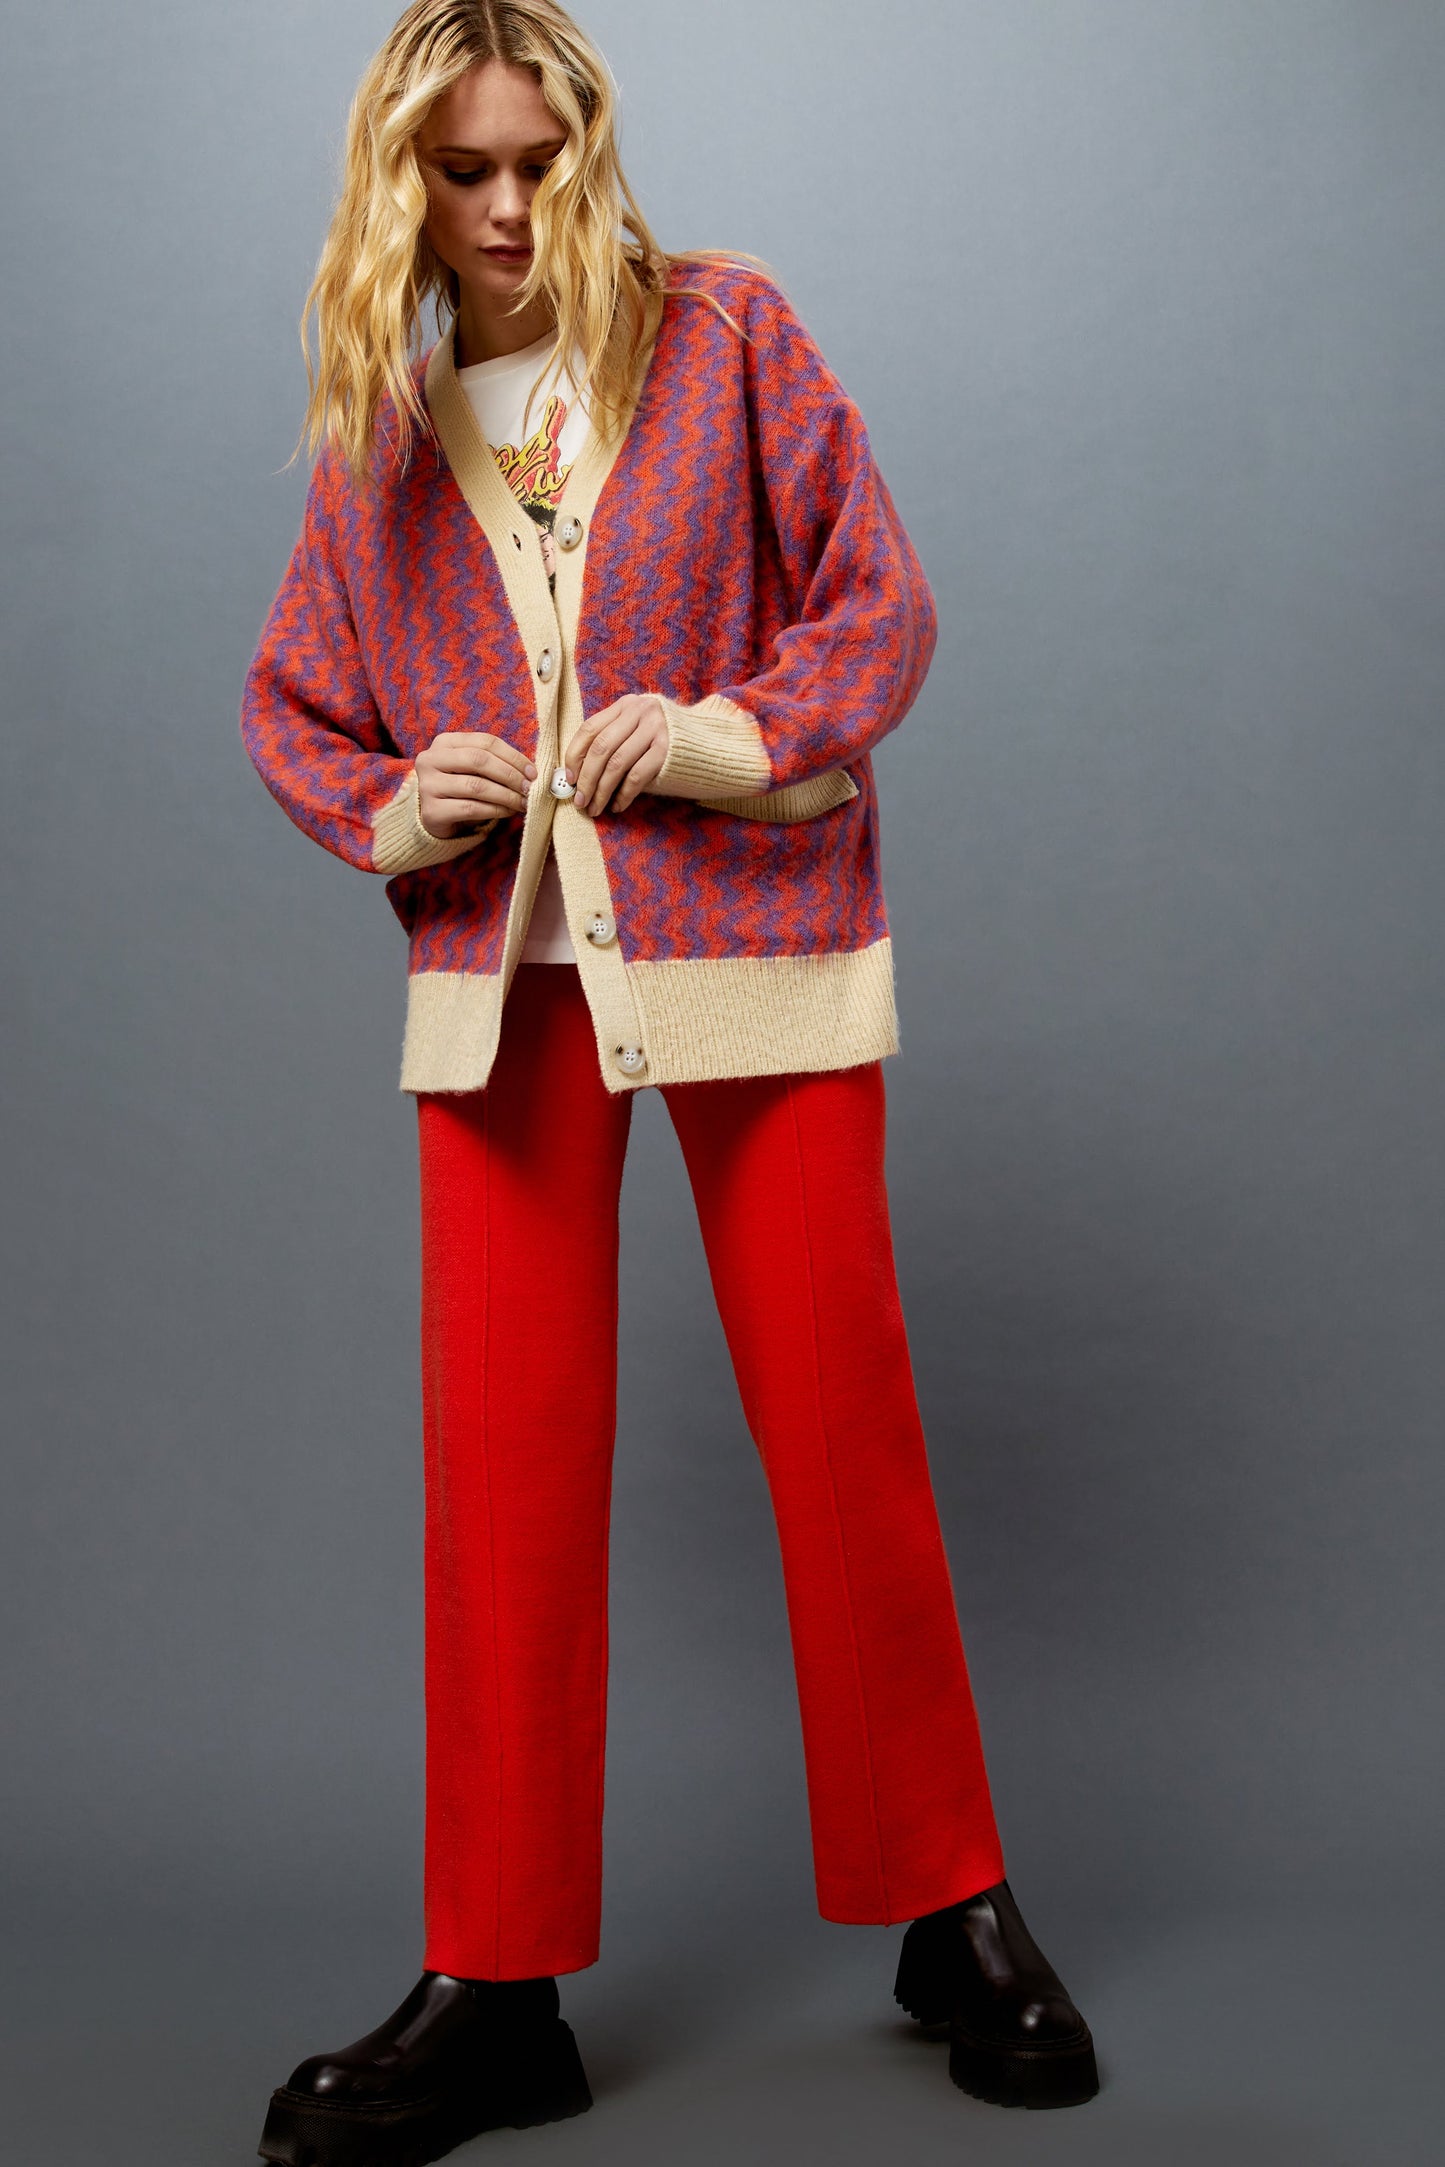 Model wearing a zig zag pattern cardigan styled with a Rod Stewart graphic tee and hot orange knit pintuck pants